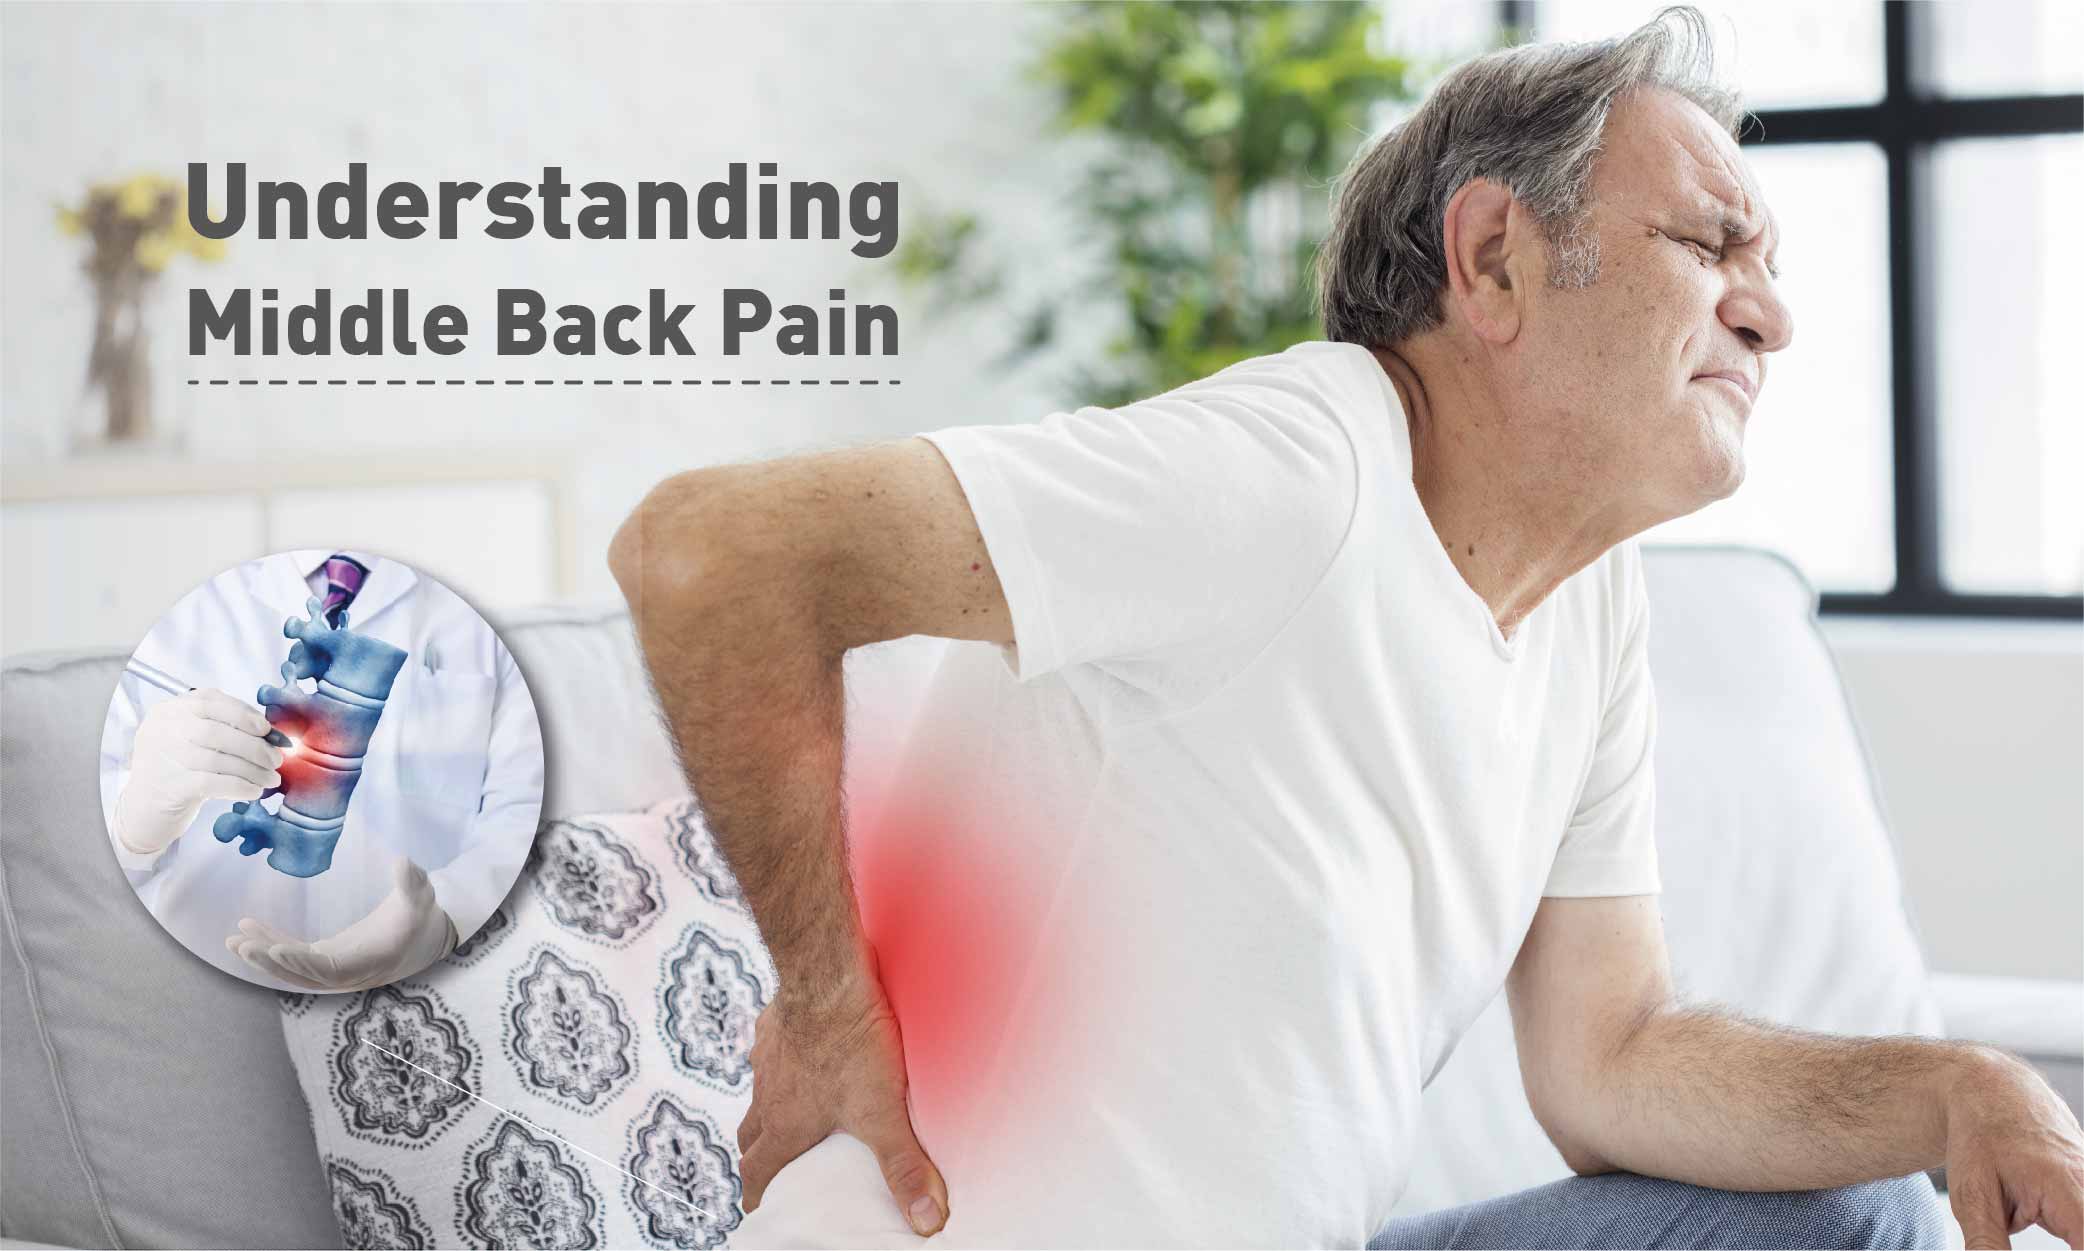 Blog Image - Middle Back Pain: All you need to know about it